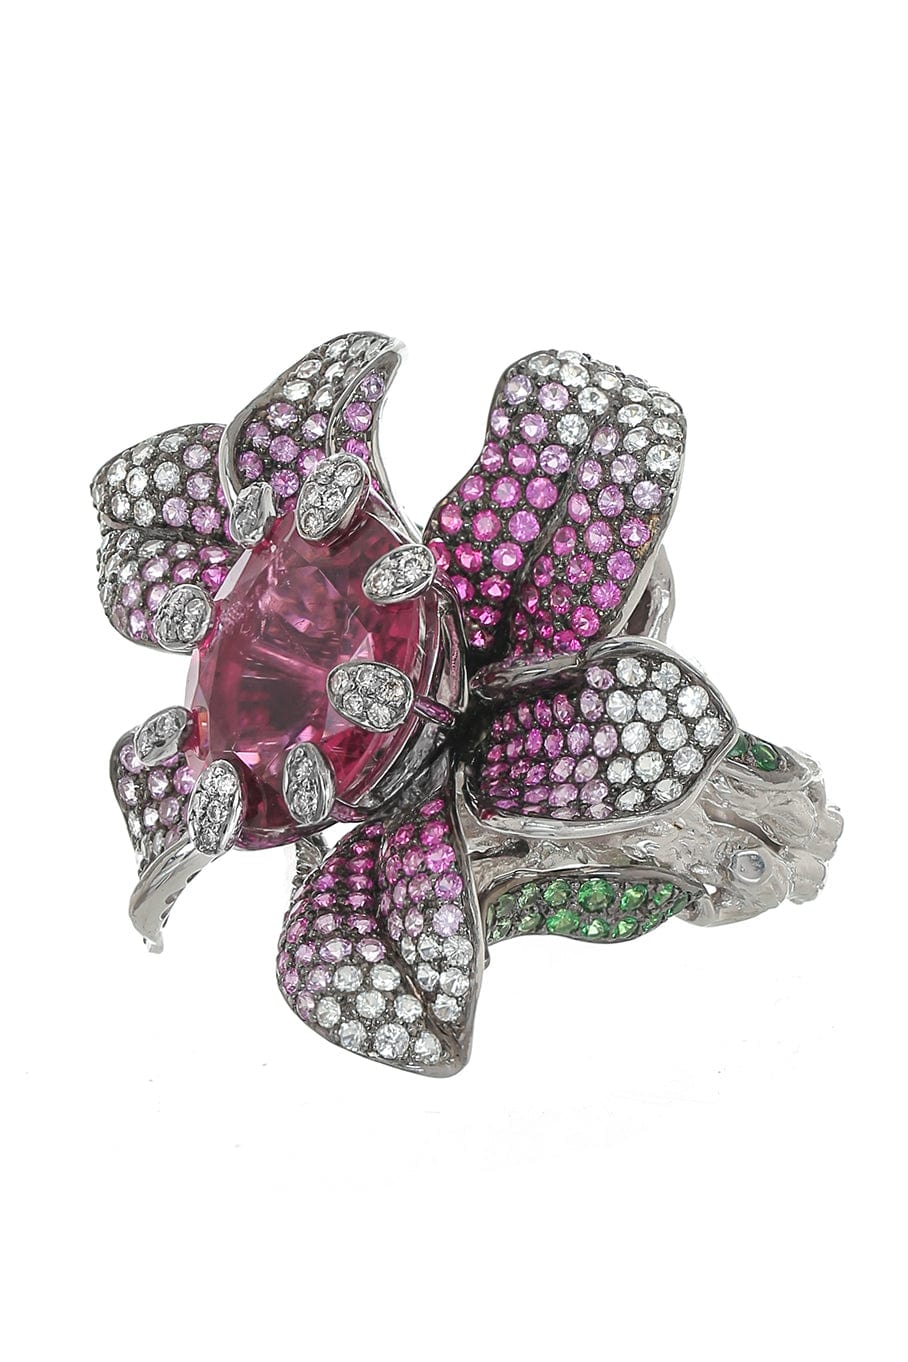 WENDY YUE-Rubellite and Pink Sapphire Flower Ring-WHITE GOLD